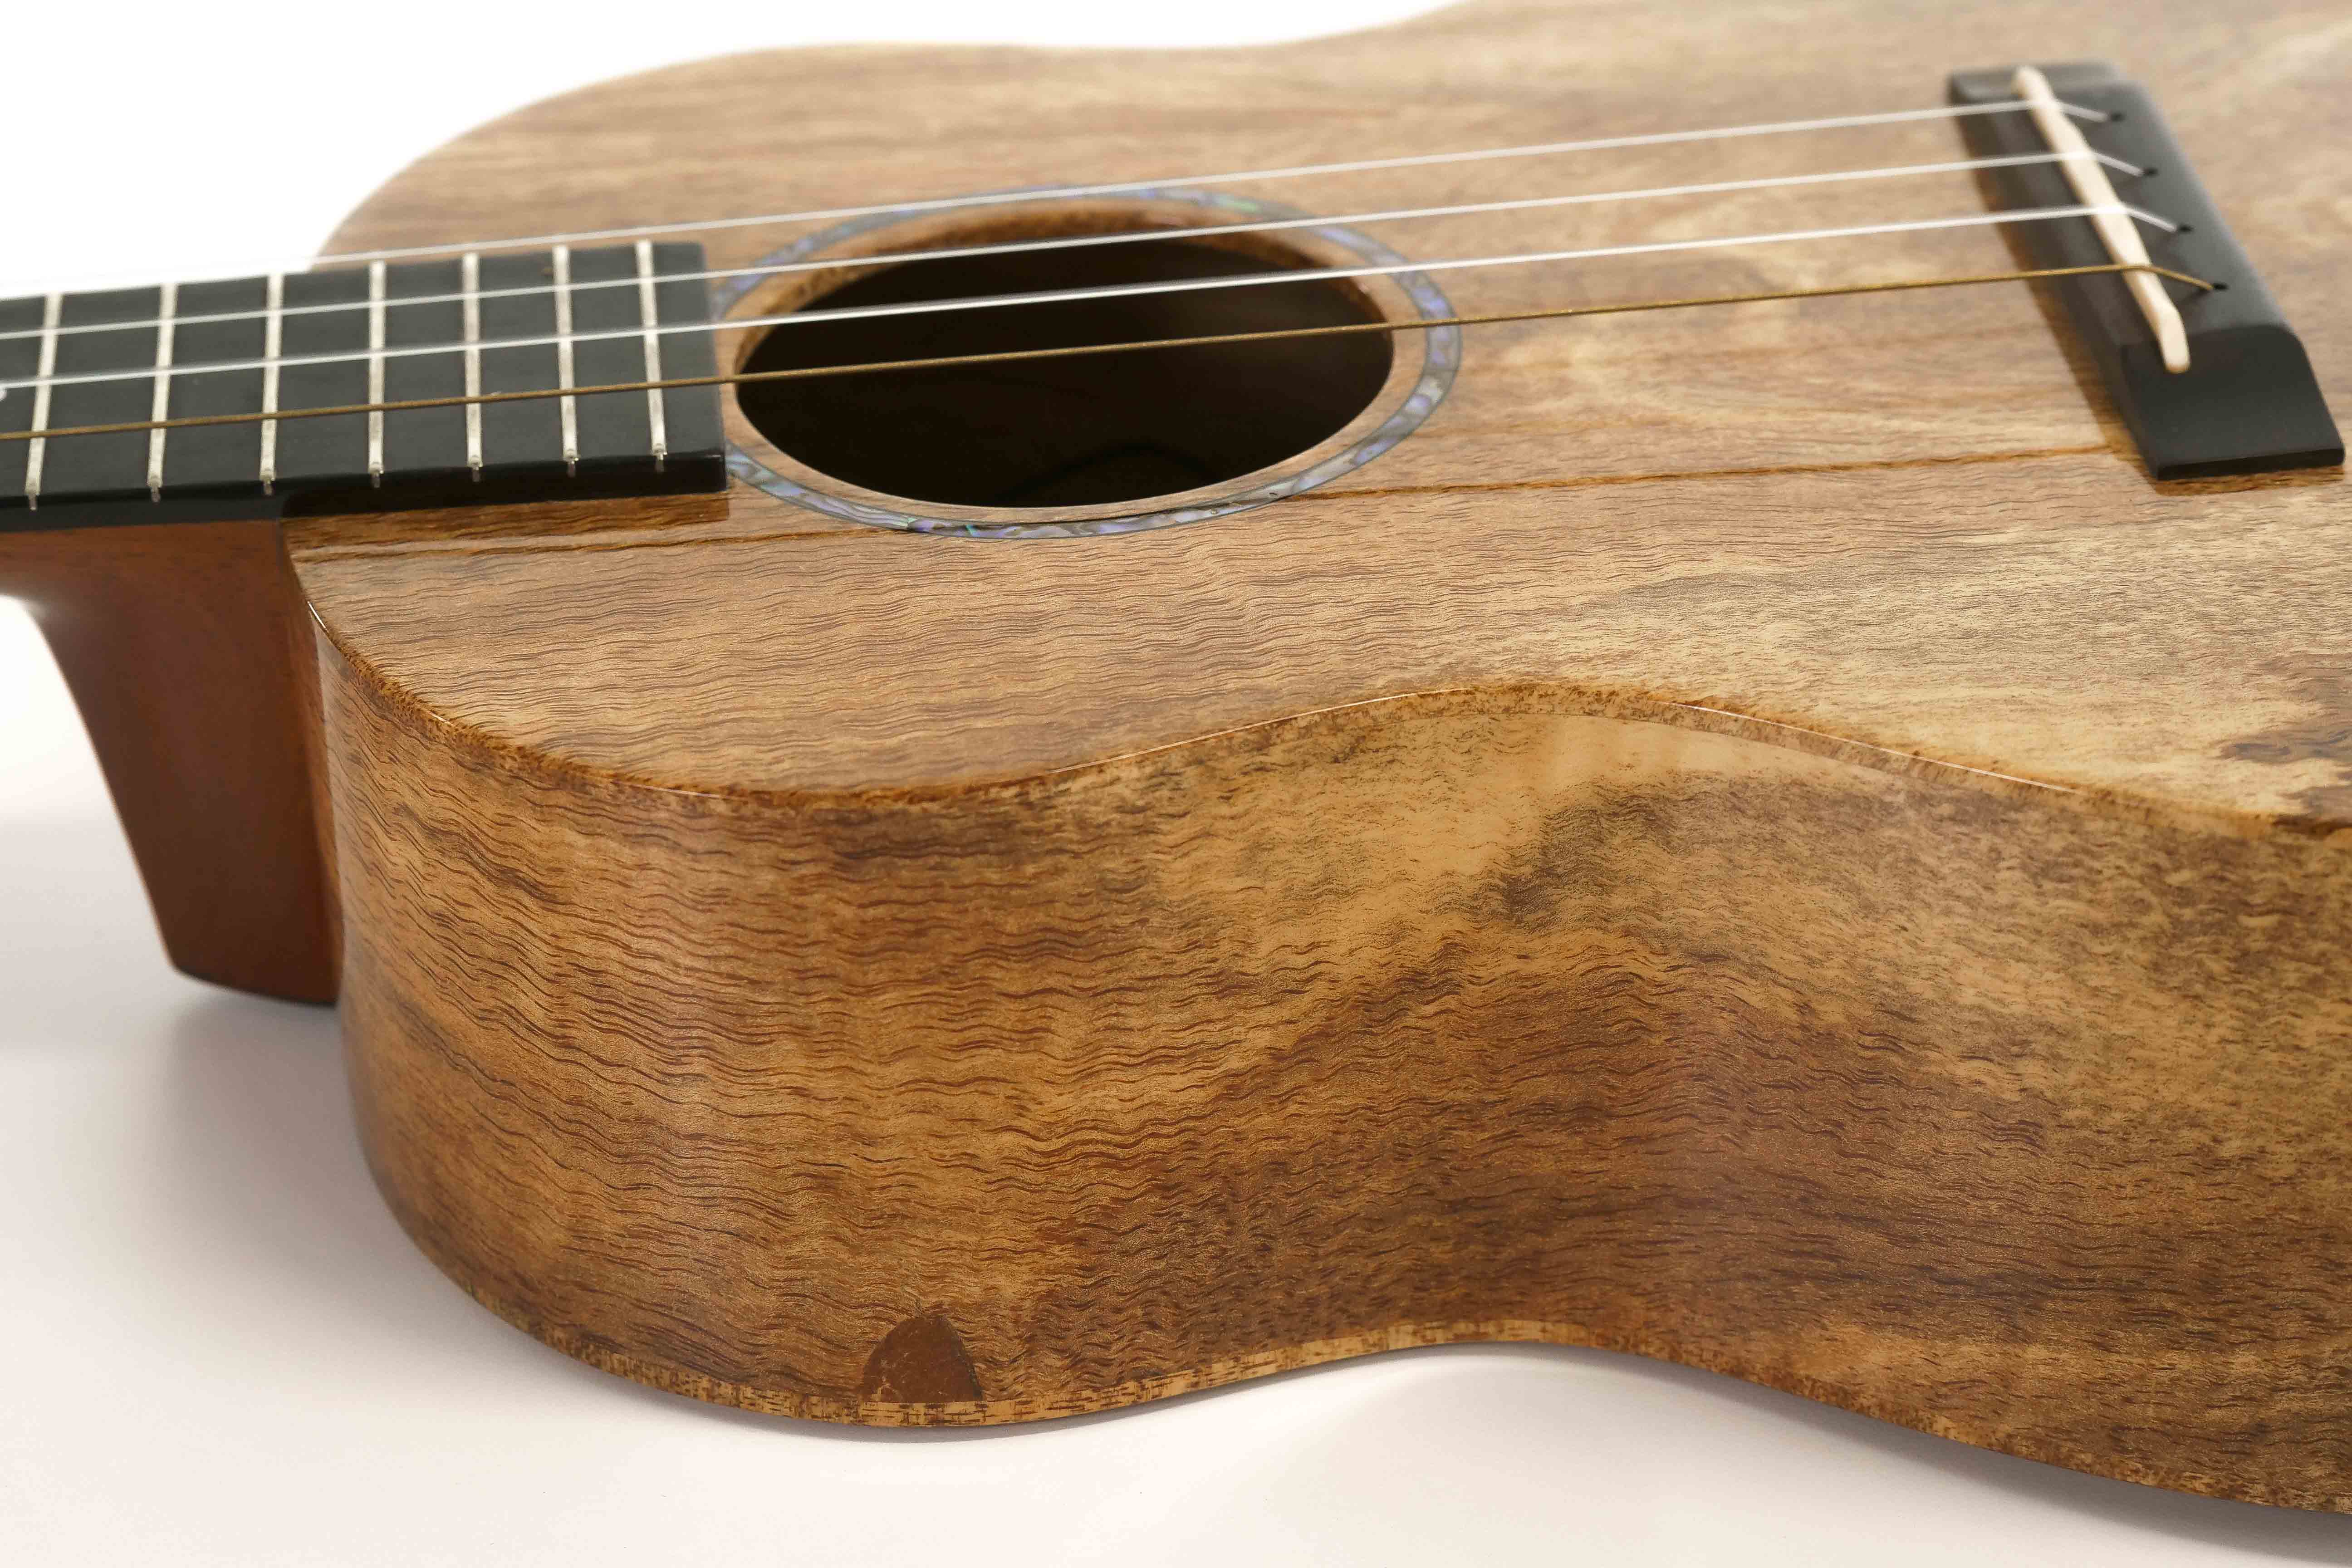 [PRE-OWNED] Romero Creations RC-GT-MG Grand Tenor Spalted Mango Ukulele "Butter Rum" LR Baggs 5.0 Pickup